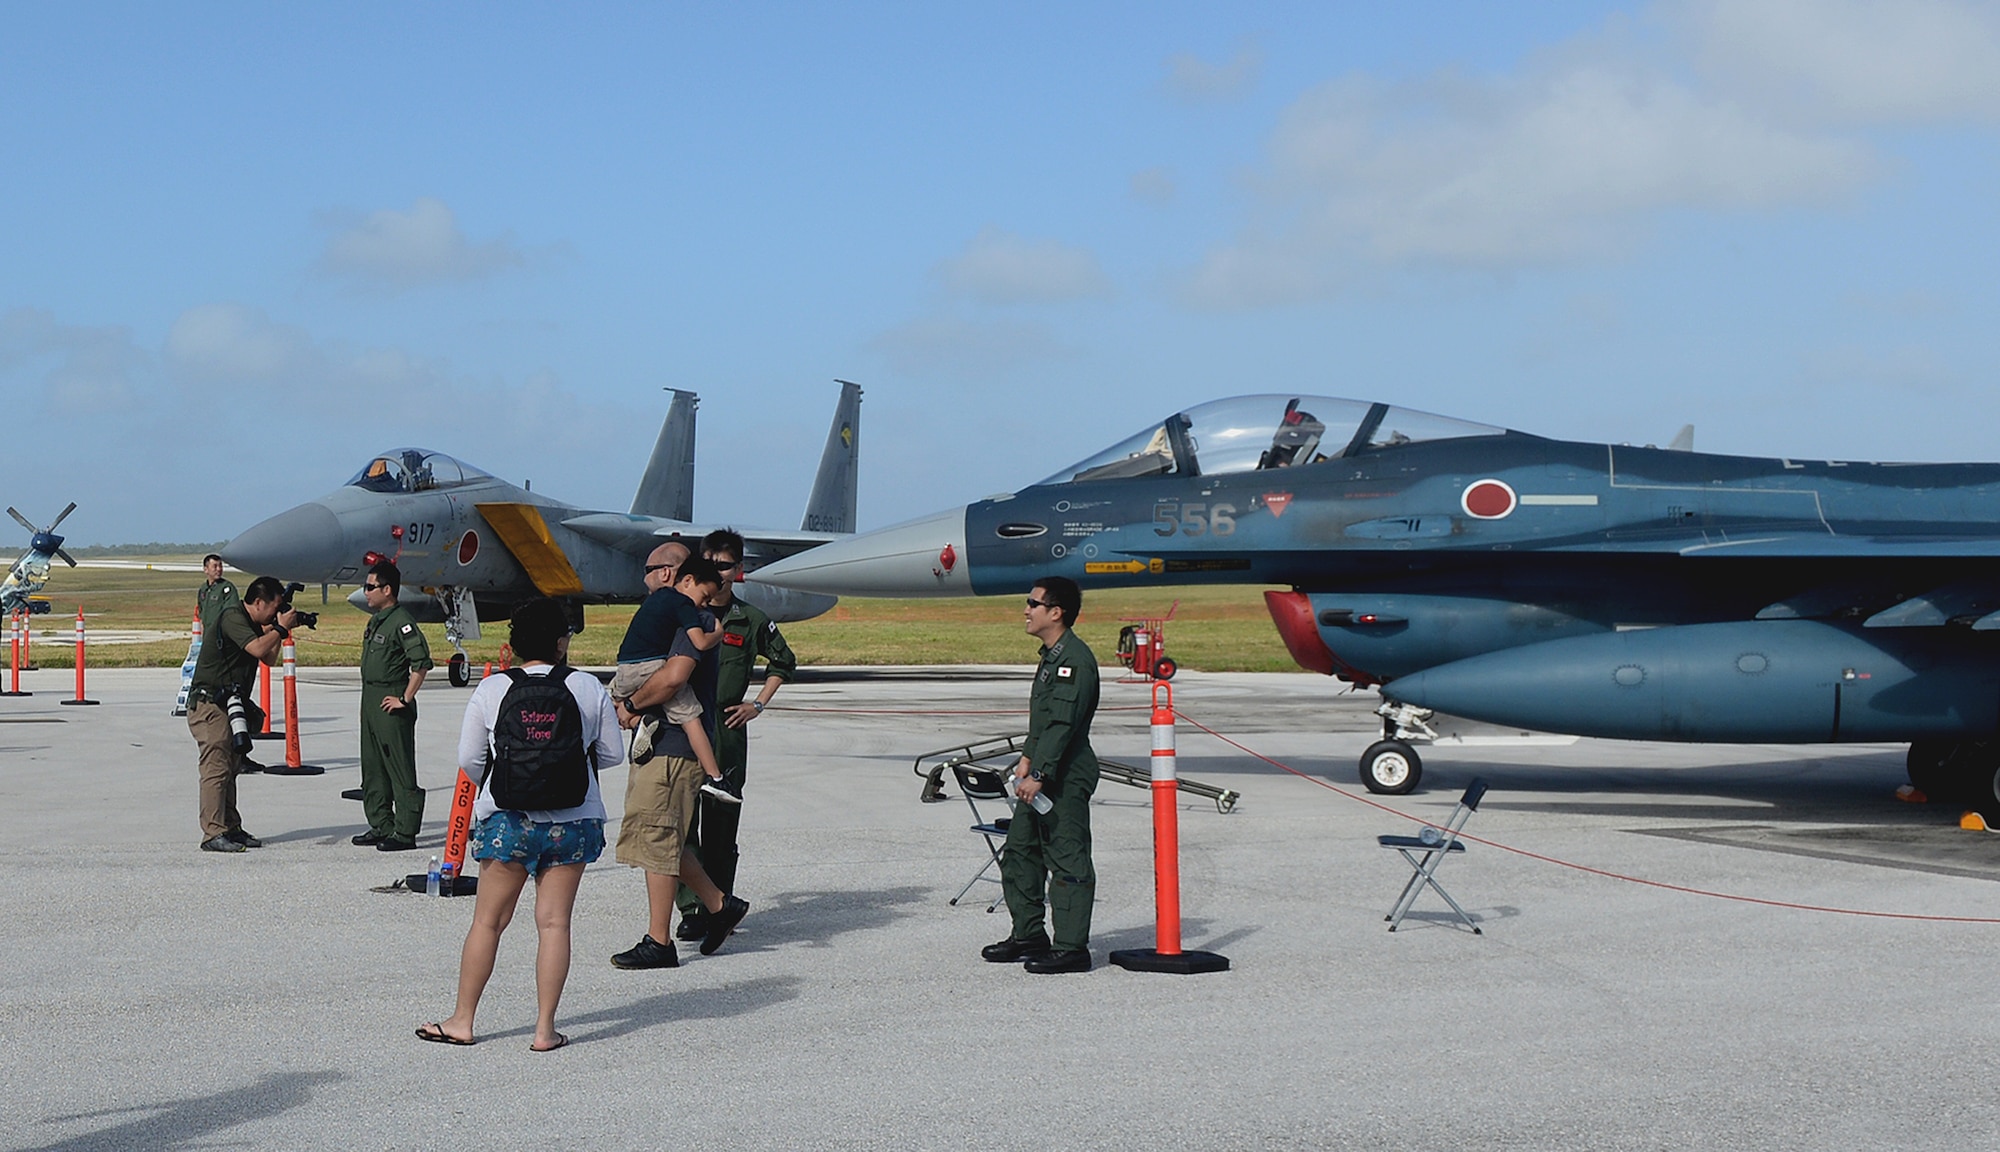 Japan Air Self-Defense Force Airmen interact with visitors of the 2016 Pacific Air Partners Open House Feb. 20 at Andersen Air Force Base, Guam. At the open house, the JASDF had multiple aircraft out on display to include the F-15J Eagle and F-2 Viper Zero. The JASDF and Royal Australian Air Force joined the U.S. Air Force in demonstrating pacific airpower to the attendees of the open house. (U.S. Air Force photo/Staff Sgt. Benjamin Gonsier)